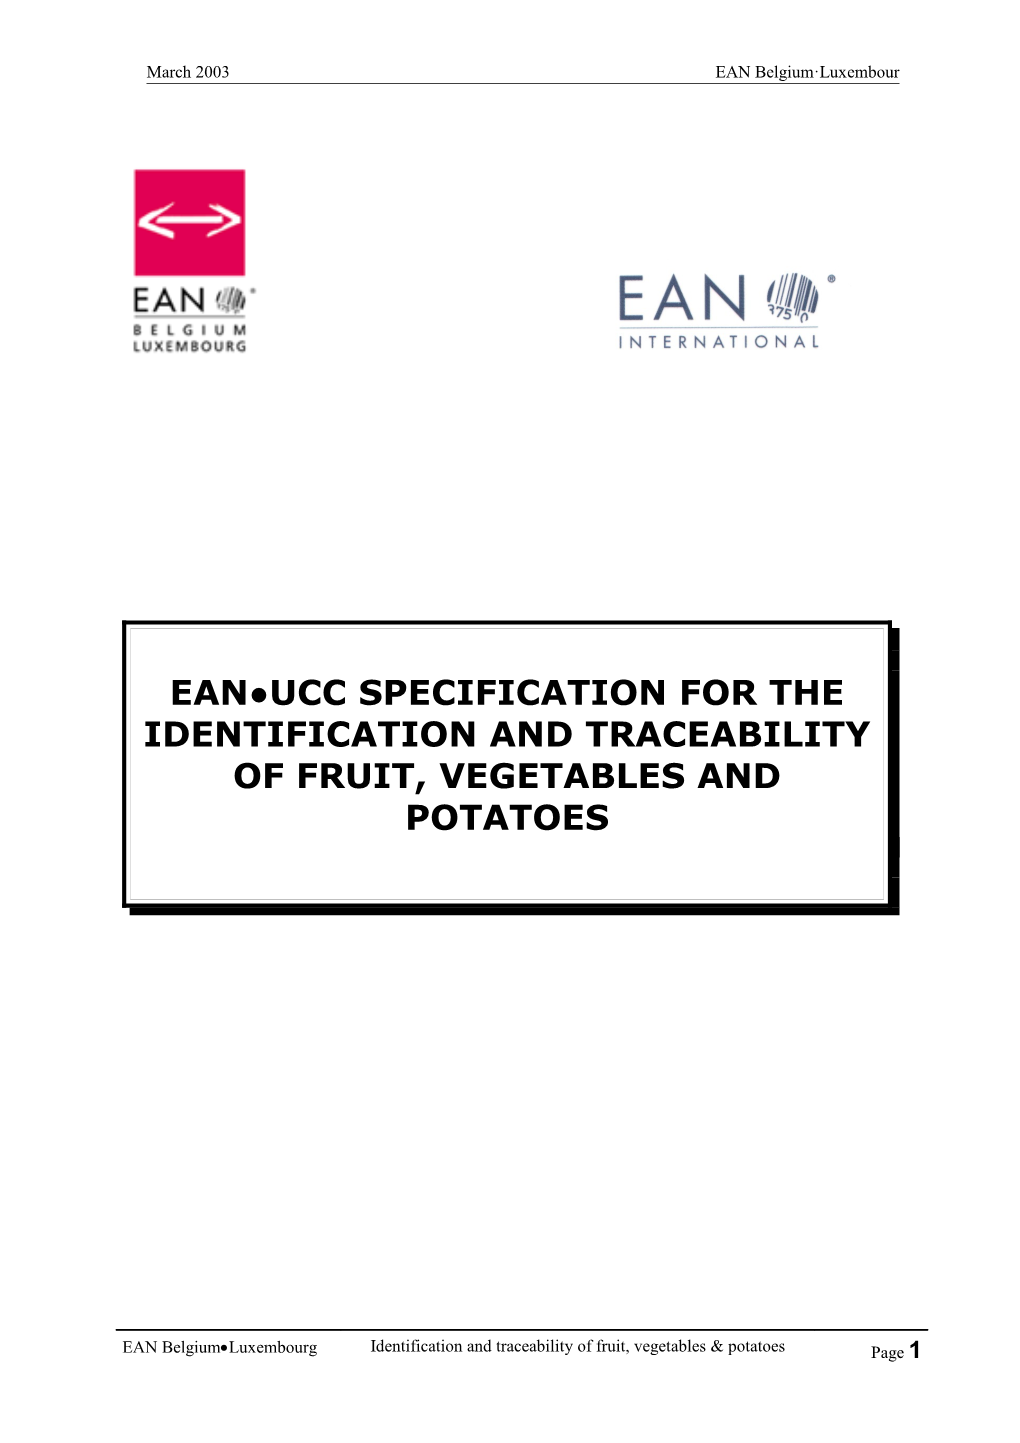 EAN UCC Specification for the Identification and Traceability of FRUIT, VEGETABLES AND